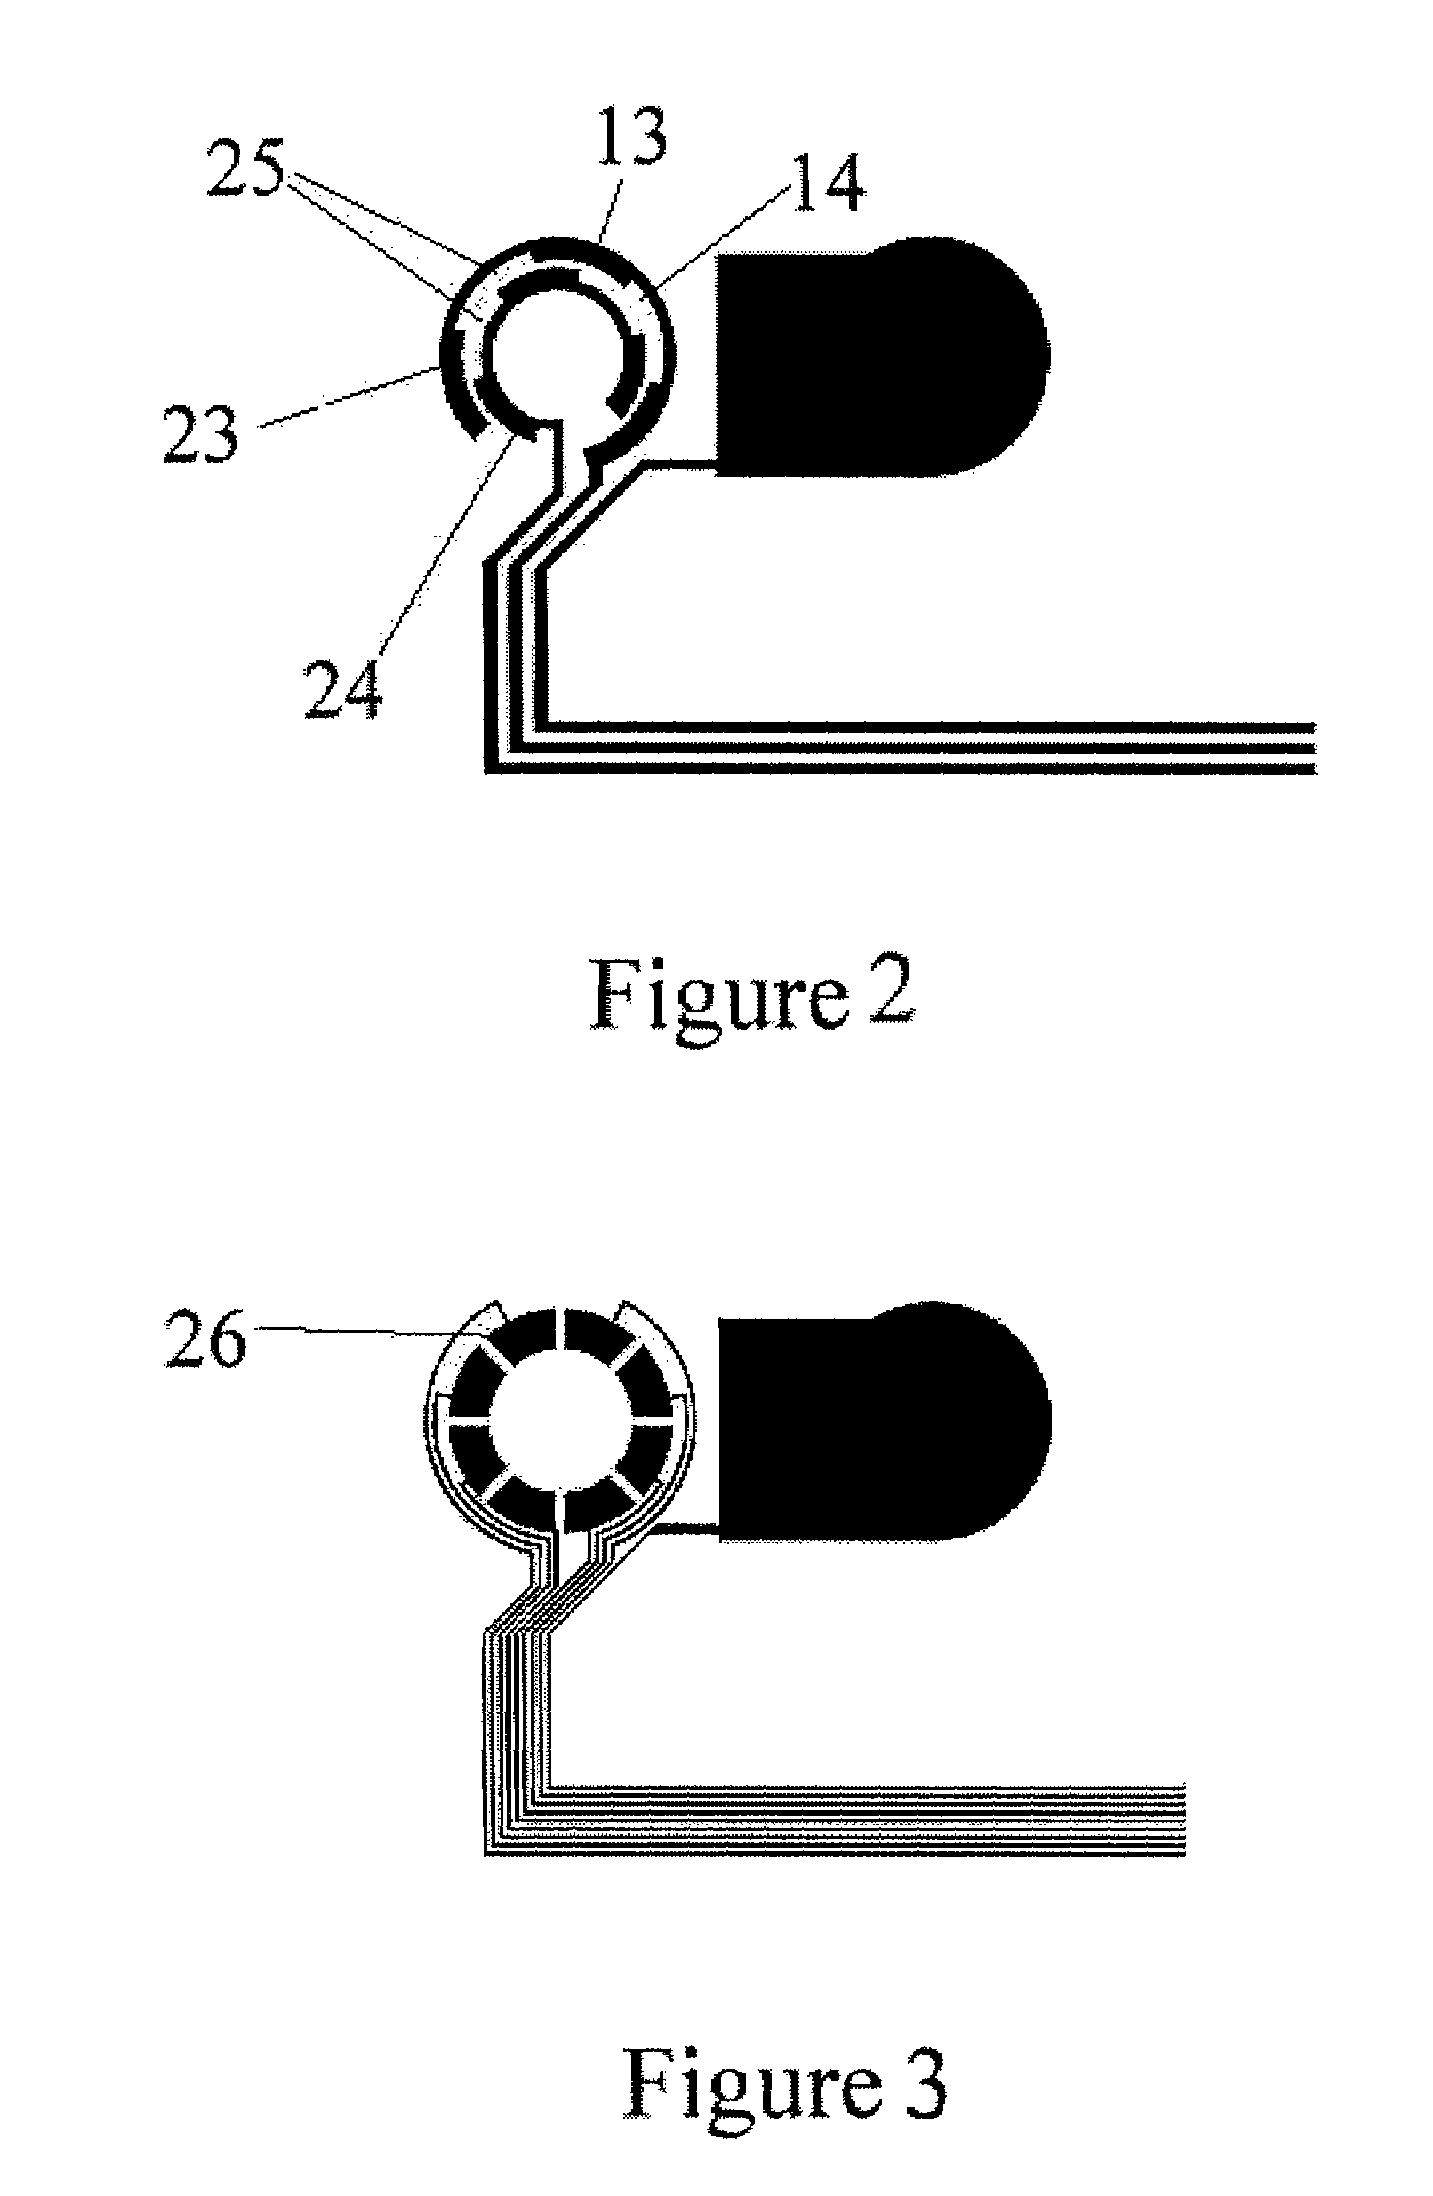 Rotary electrical switching device